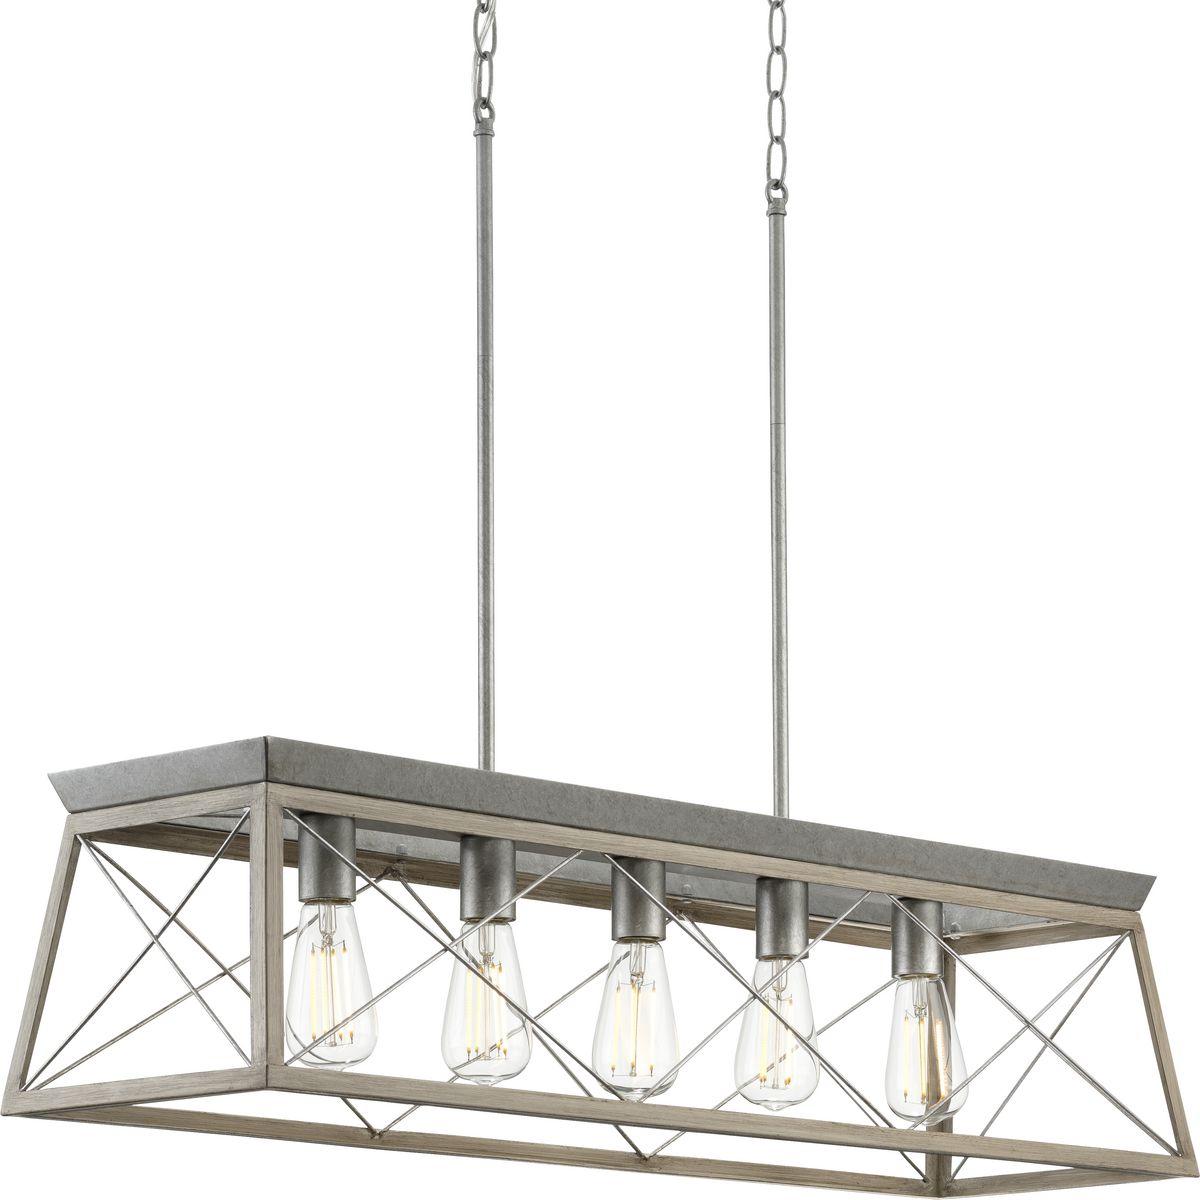 Hubbell P400048-141 Create a cozy home with the Briarwood Collection 5-Light Bleached Oak Farmhouse Linear Island Chandelier. Light sources exude a comforting country glow as they peek through the classic X-brace design reminiscent of country barn doors and rustic farmhouse 